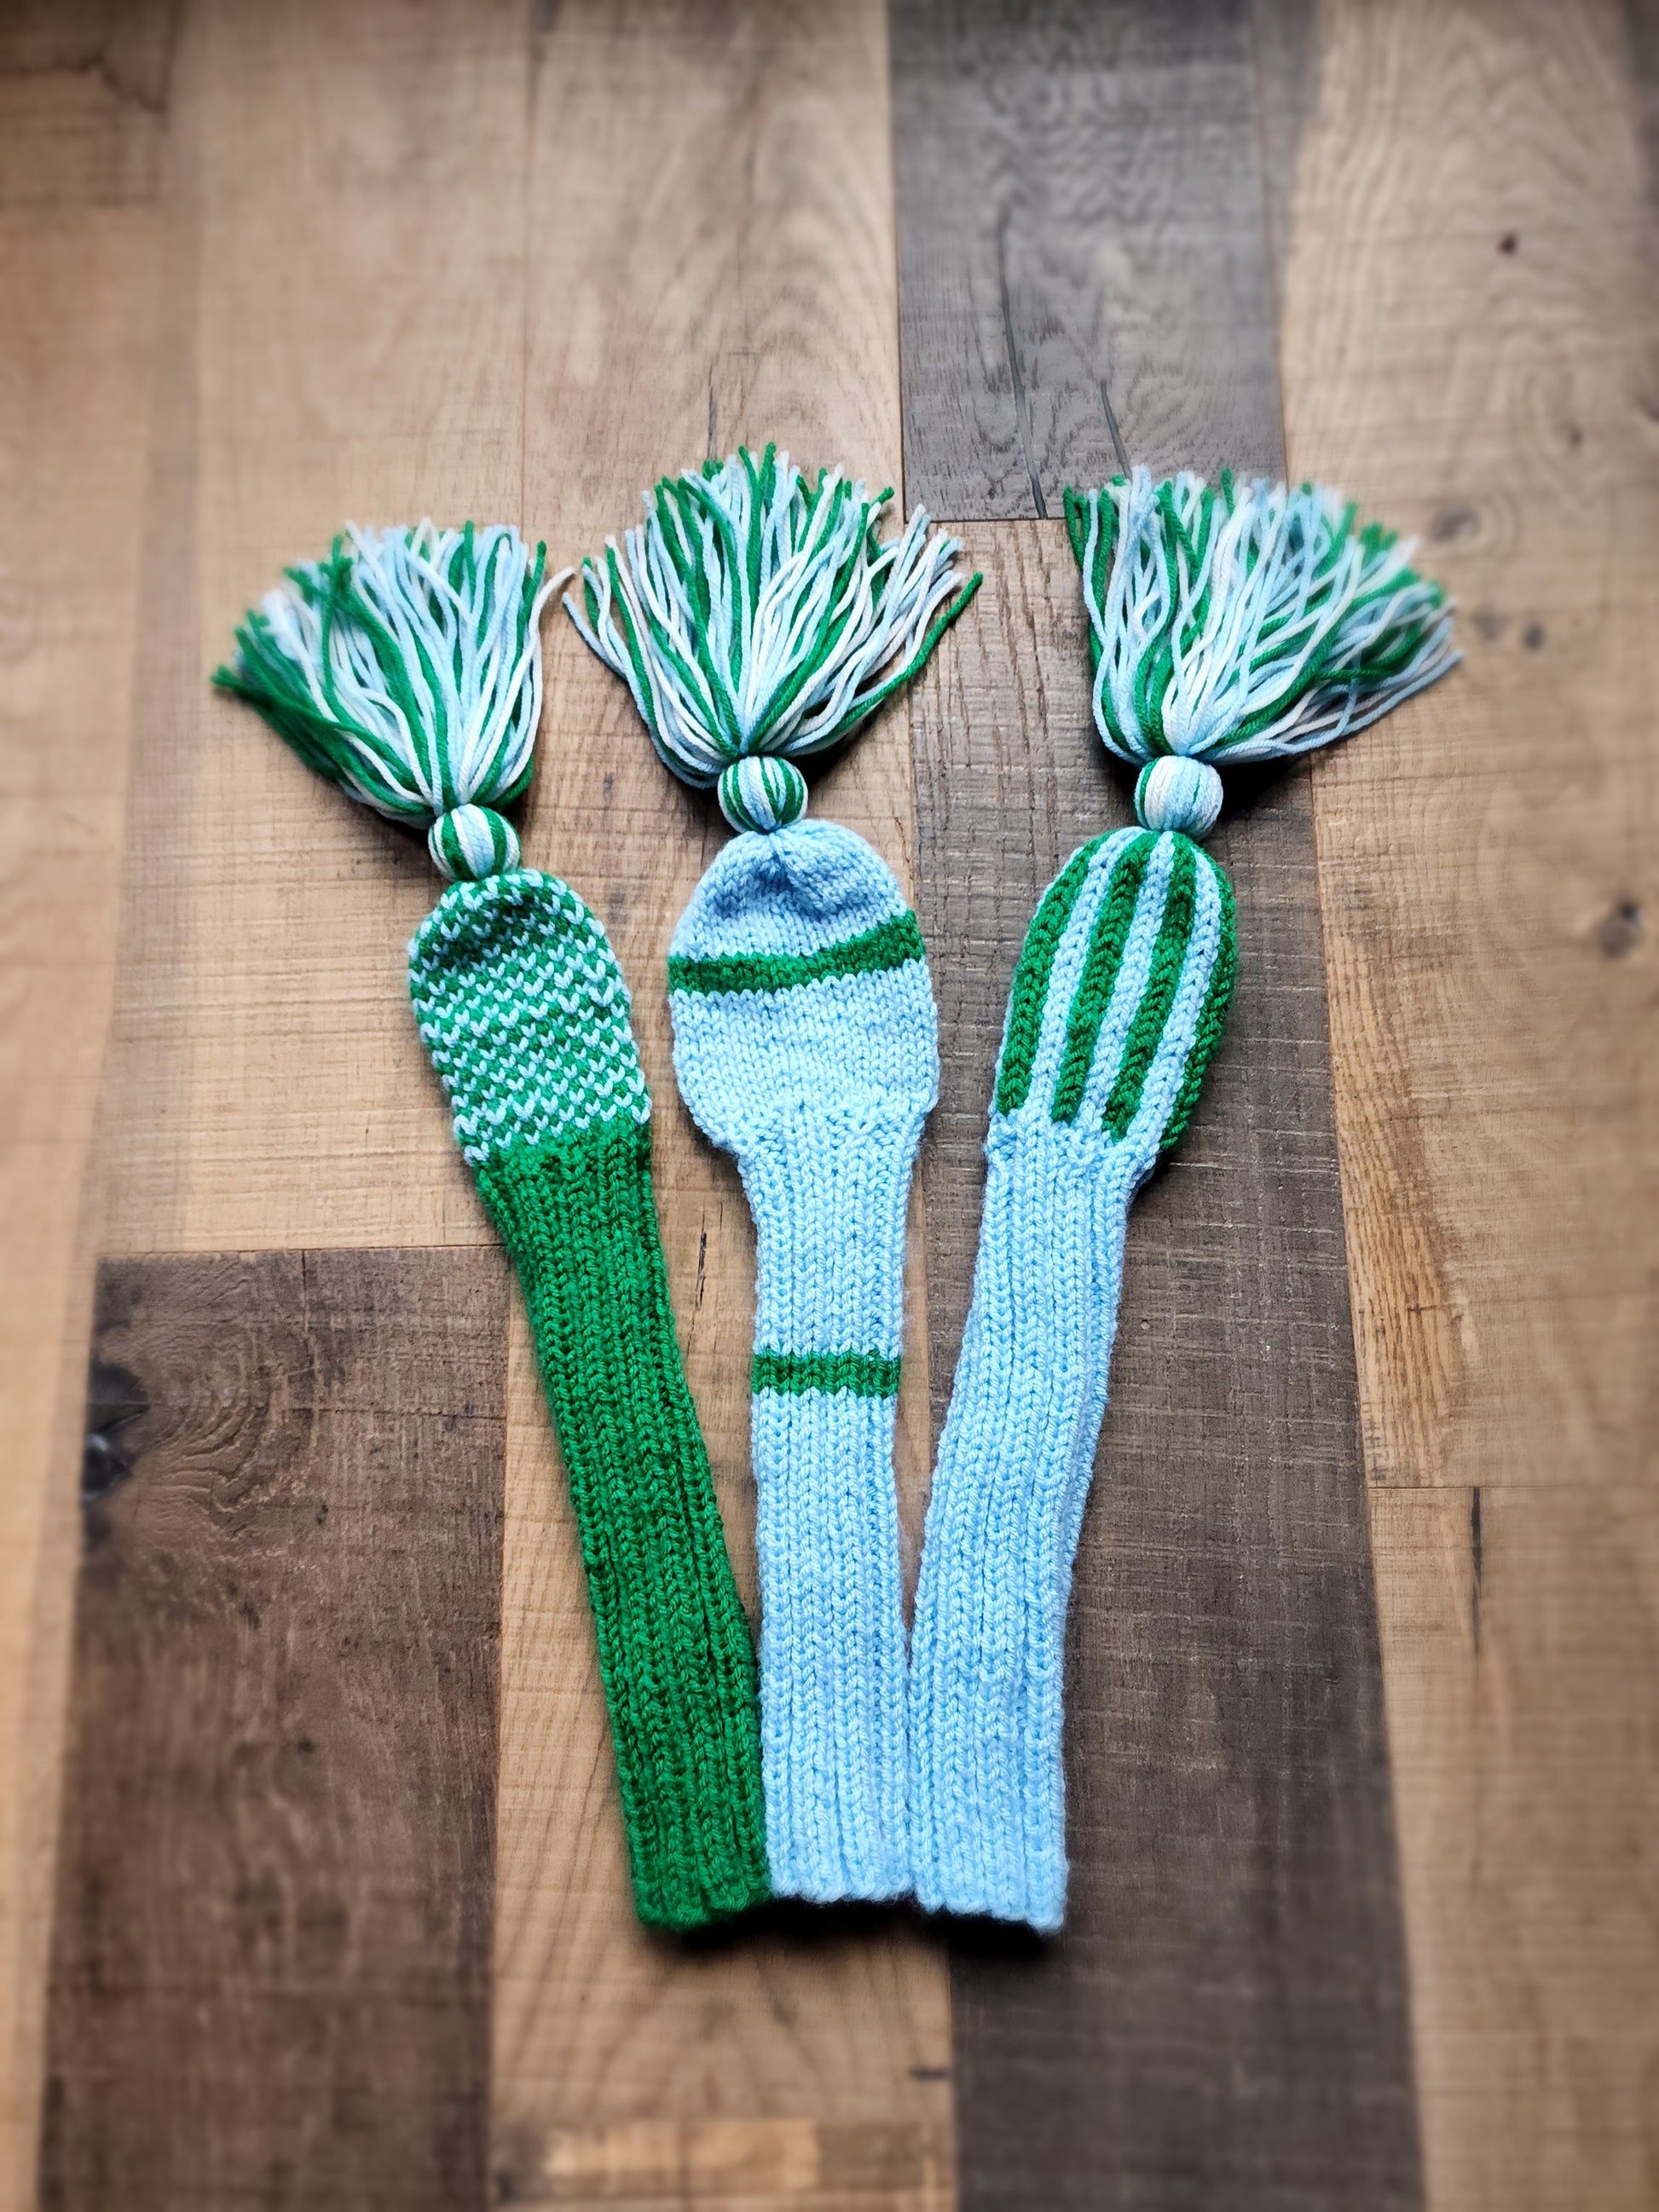 Three Golf Club Head Covers Retro-Vintage Blue, Green & White with Tassels for Drivers, Woods - Austinknittylimits